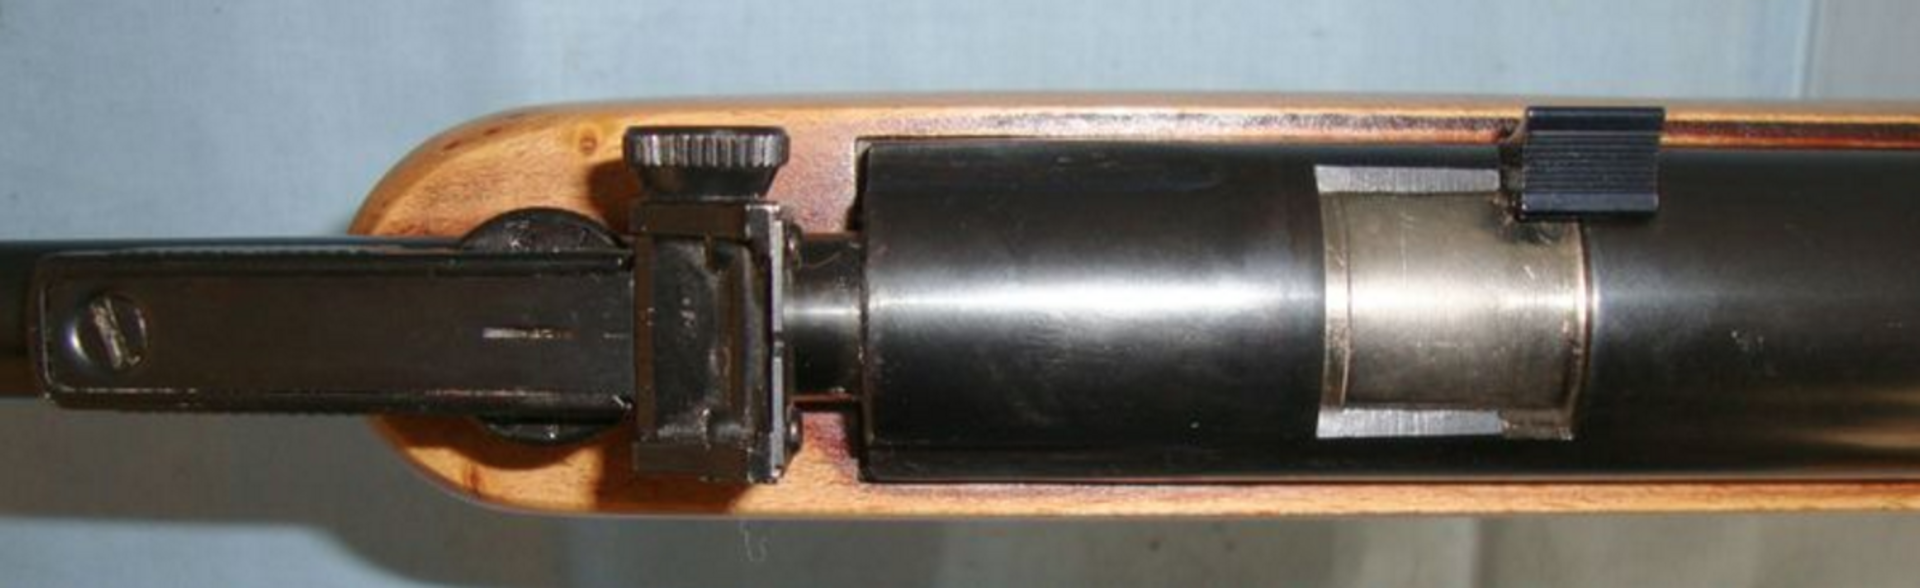 Post 1992 B.S.A. Airsporter RB2 Magnum Rotary Breech Under Lever .22 Calibre Air Rifle - Image 2 of 3